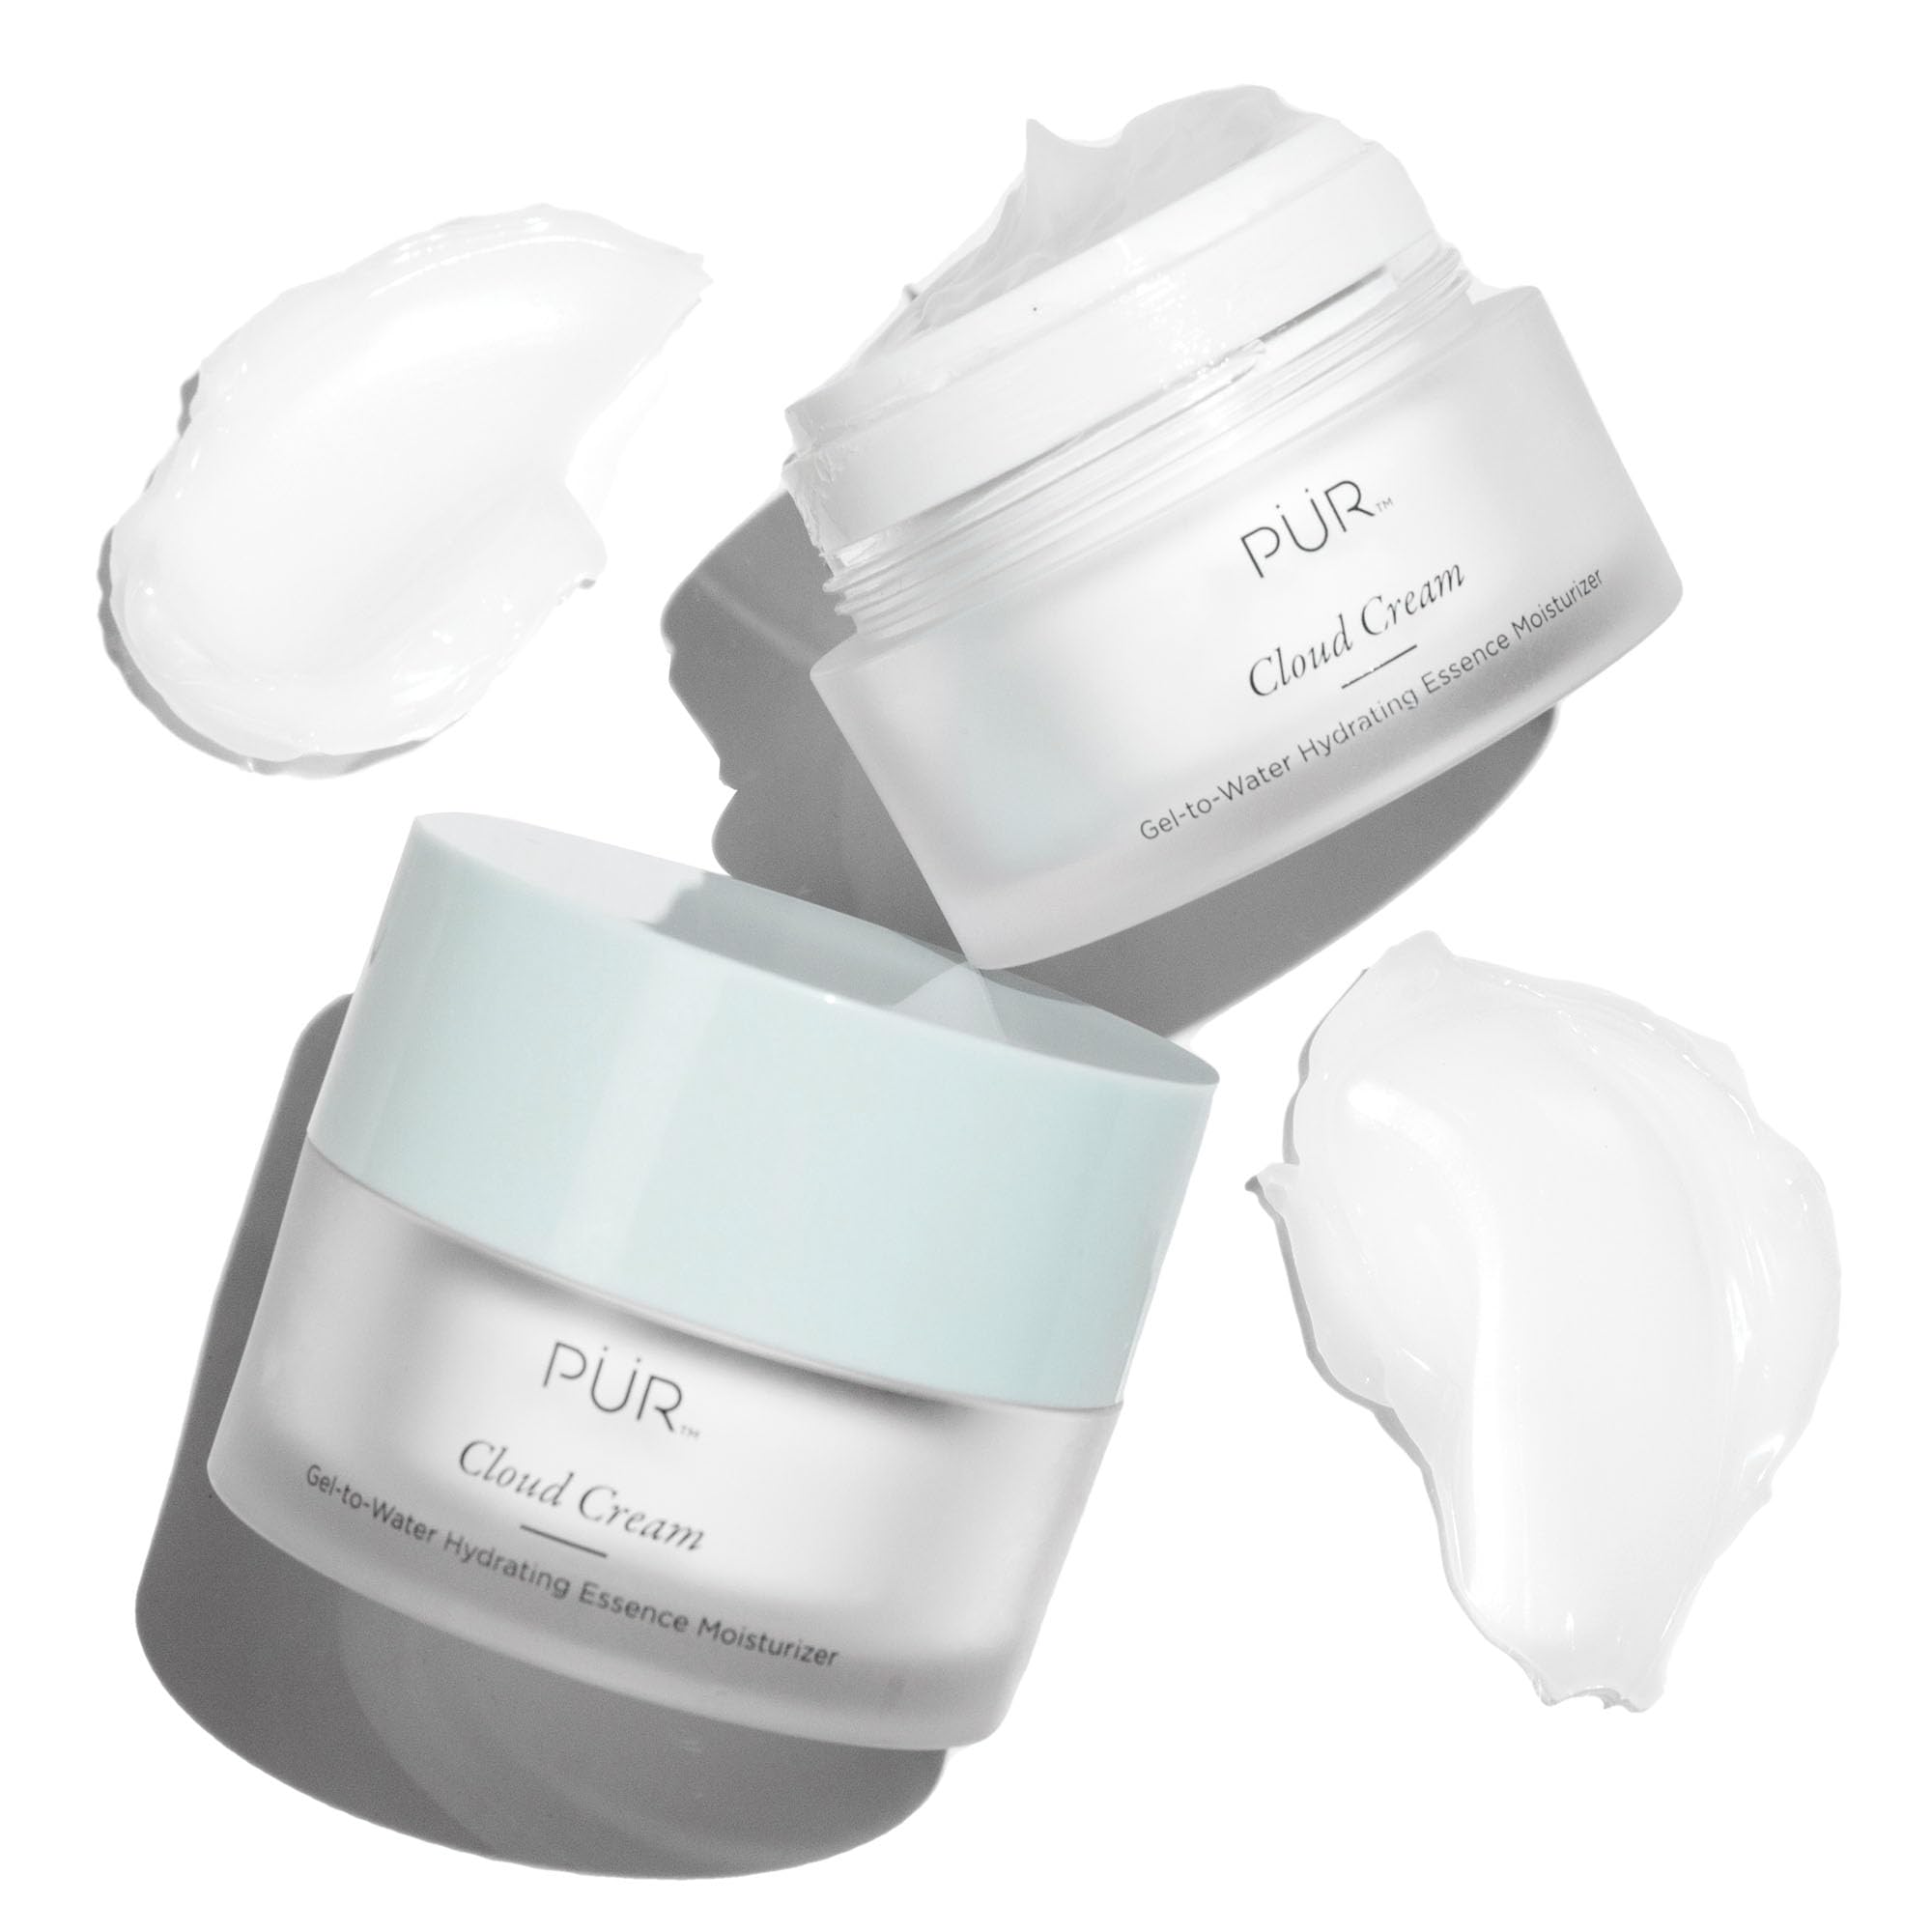 PÜR MINERALS 4-in-1 Cloud Cream Face Moisturizer - Water-To-Gel Hydrating Formula for All Skin Types - 2oz